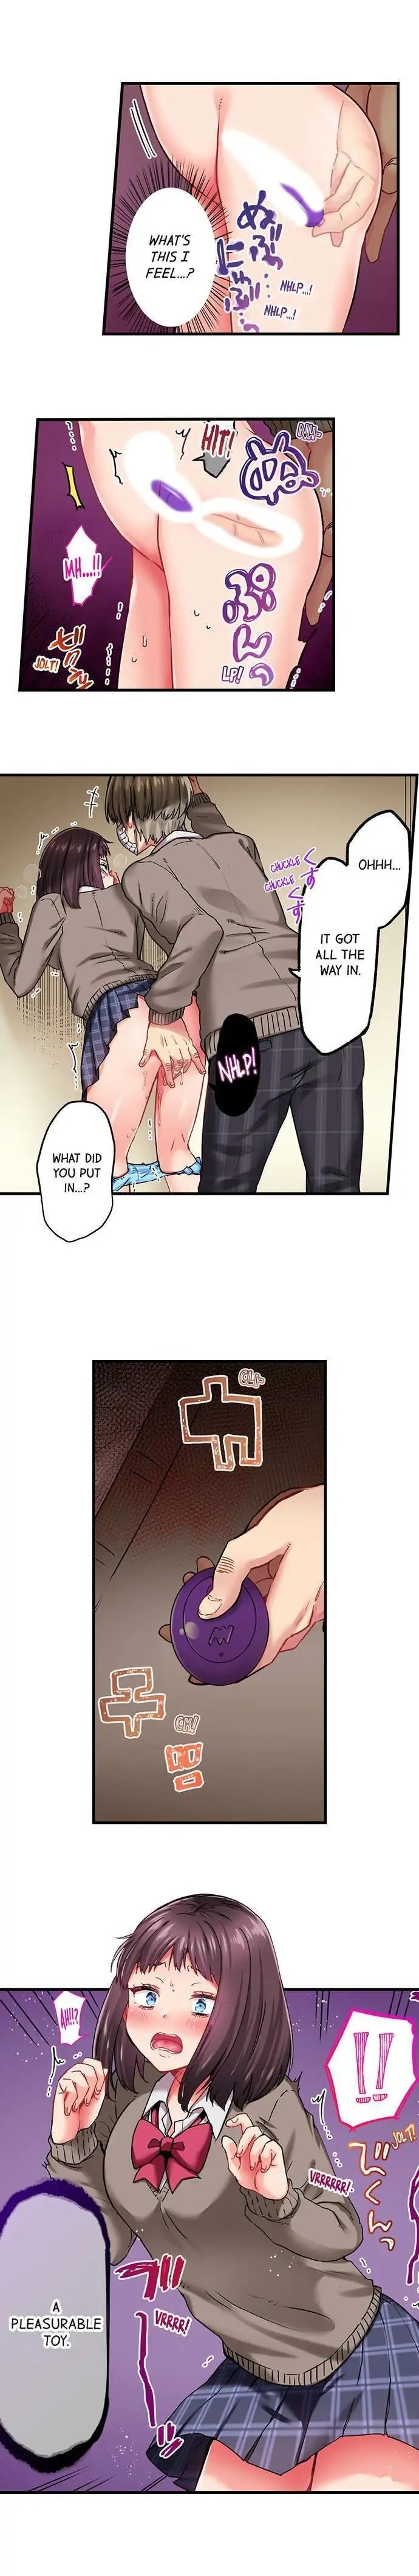 Cumming 100 Times To Protect My Crush - Chapter 19 Page 3